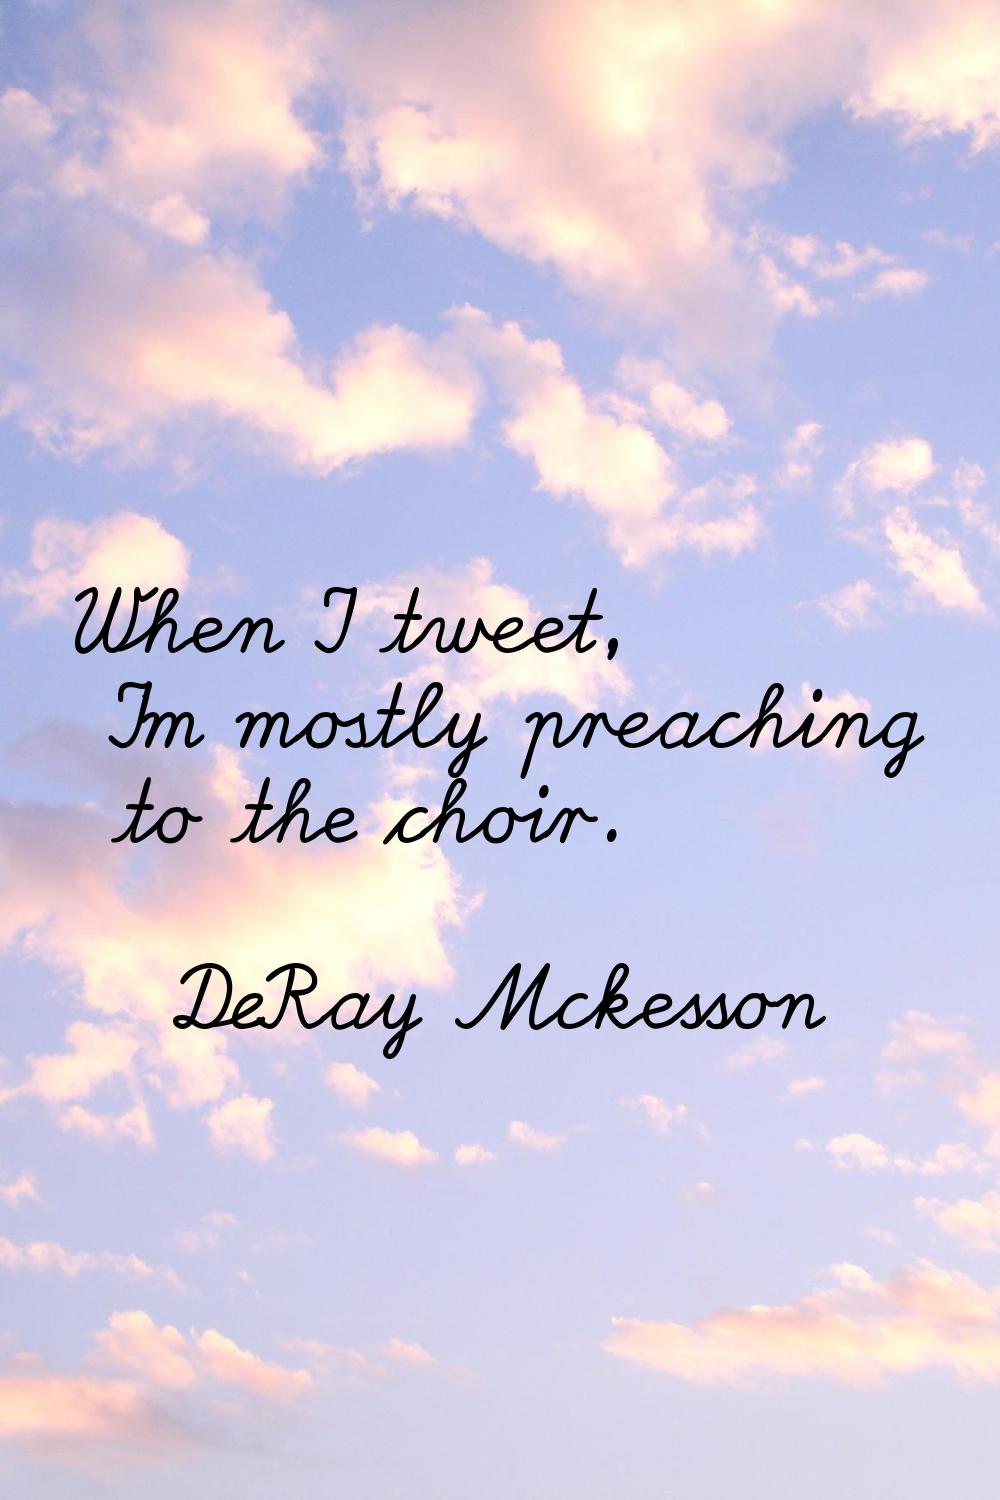 When I tweet, I'm mostly preaching to the choir.